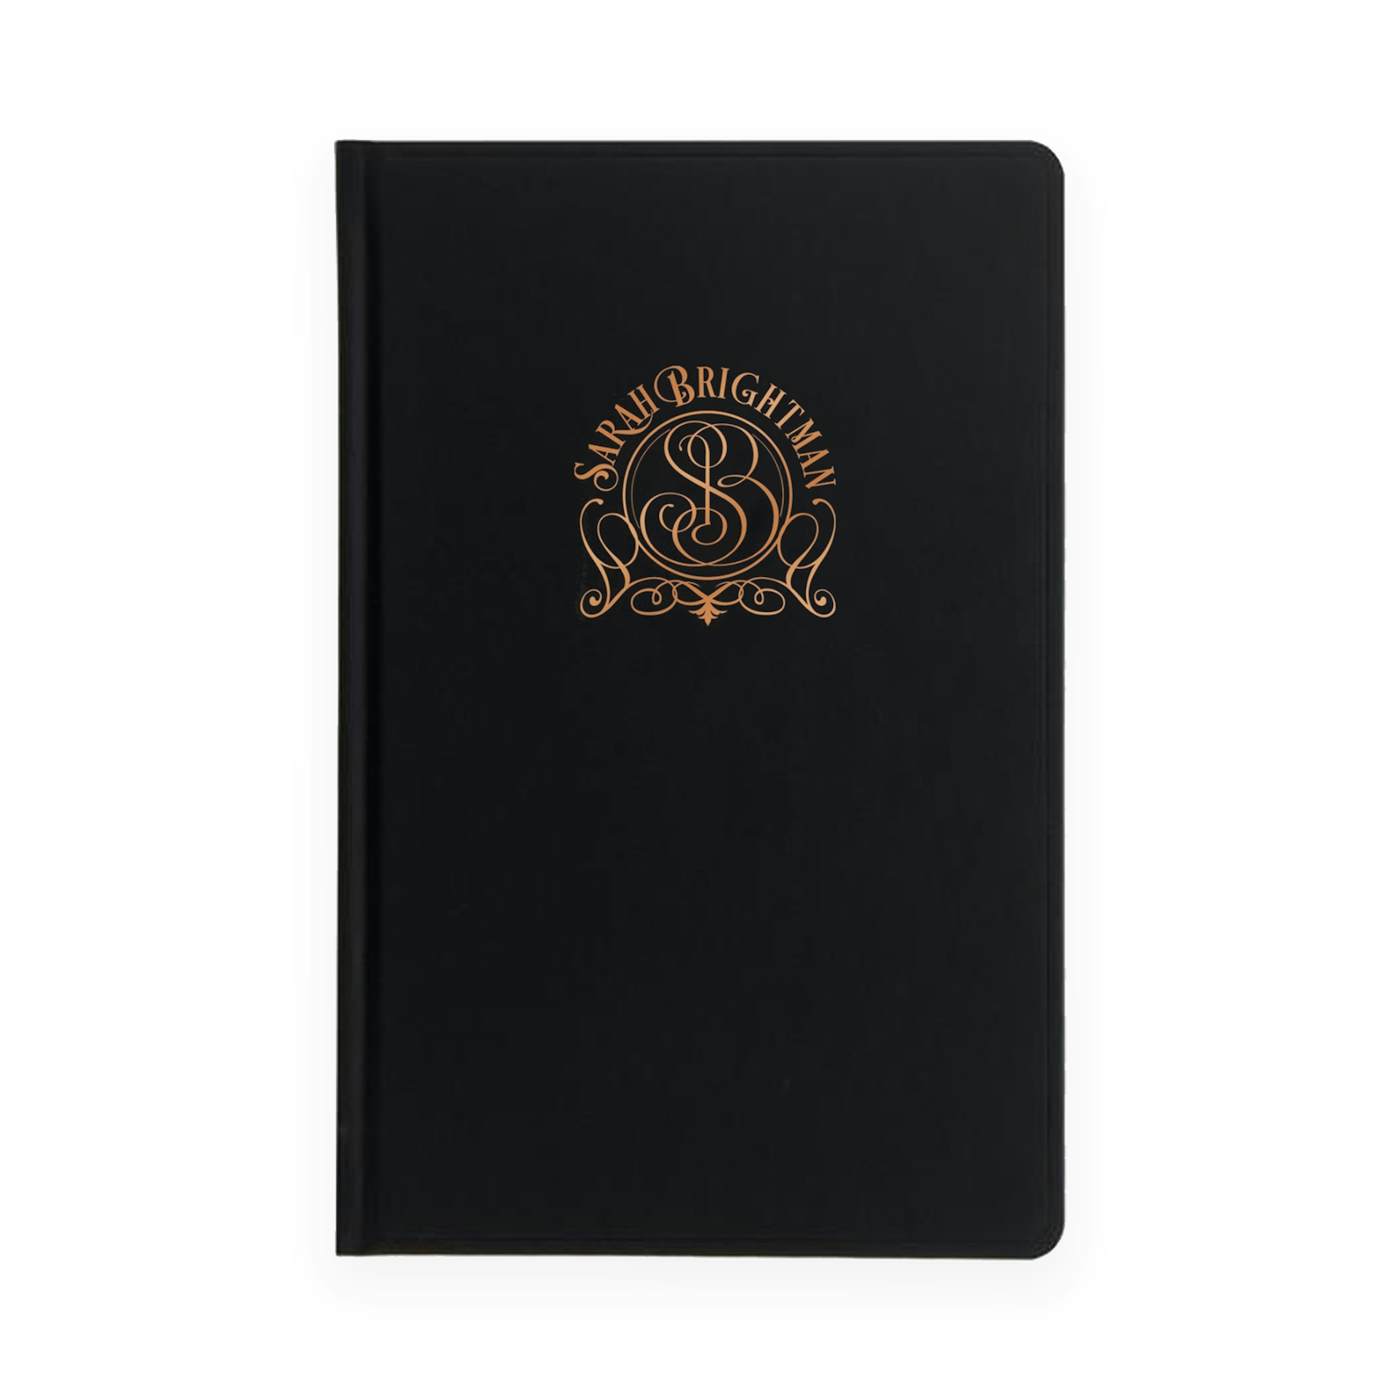 Sarah Brightman Faux Leather Notebook